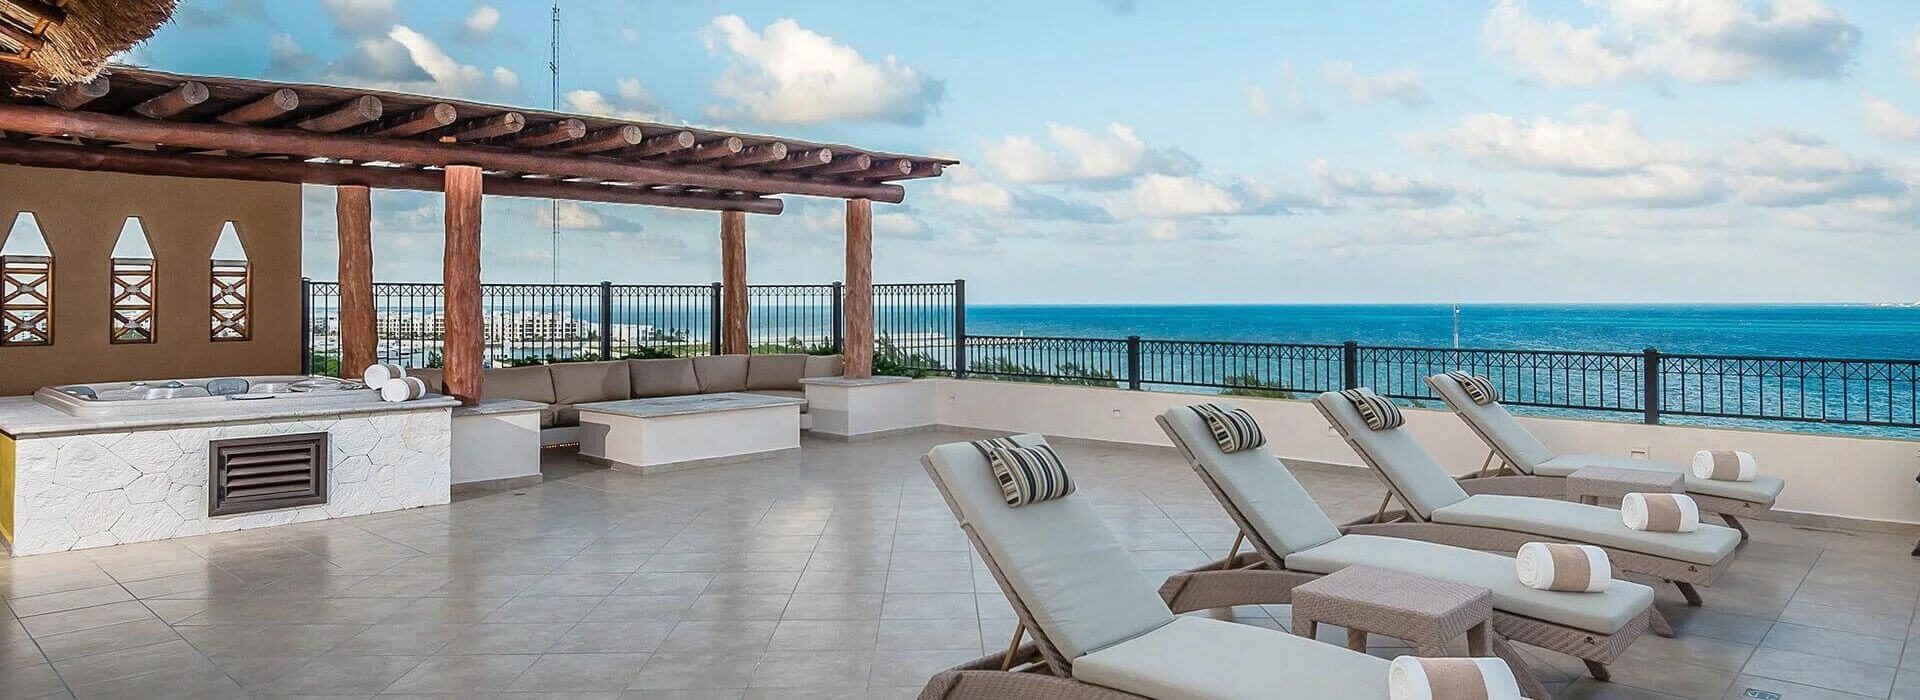 An expansive terrace with an outdoor living area with sofa, firepit, hot tub, sun loungers, and sweeping views of the turquoise Caribbean sea.